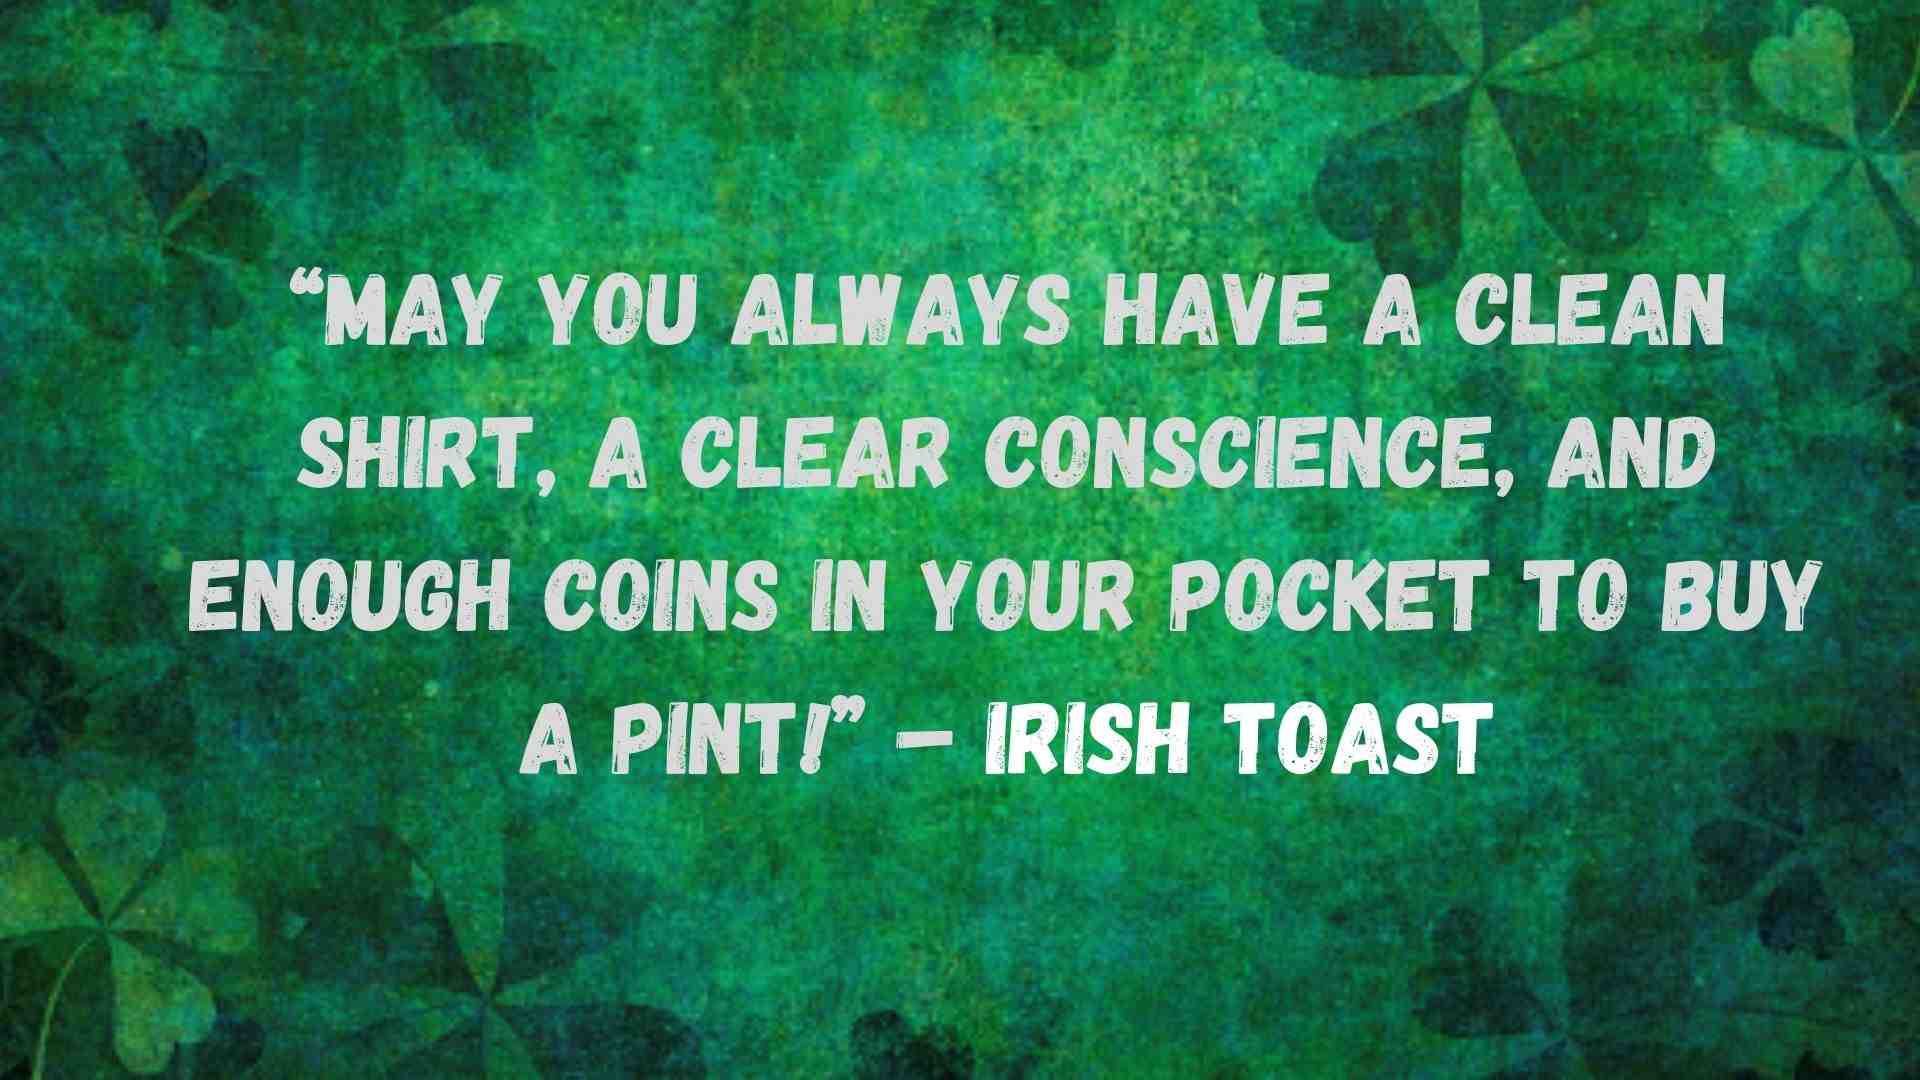 St Patricks Day 2022 Quotes | What to Write in a St Patricks Day